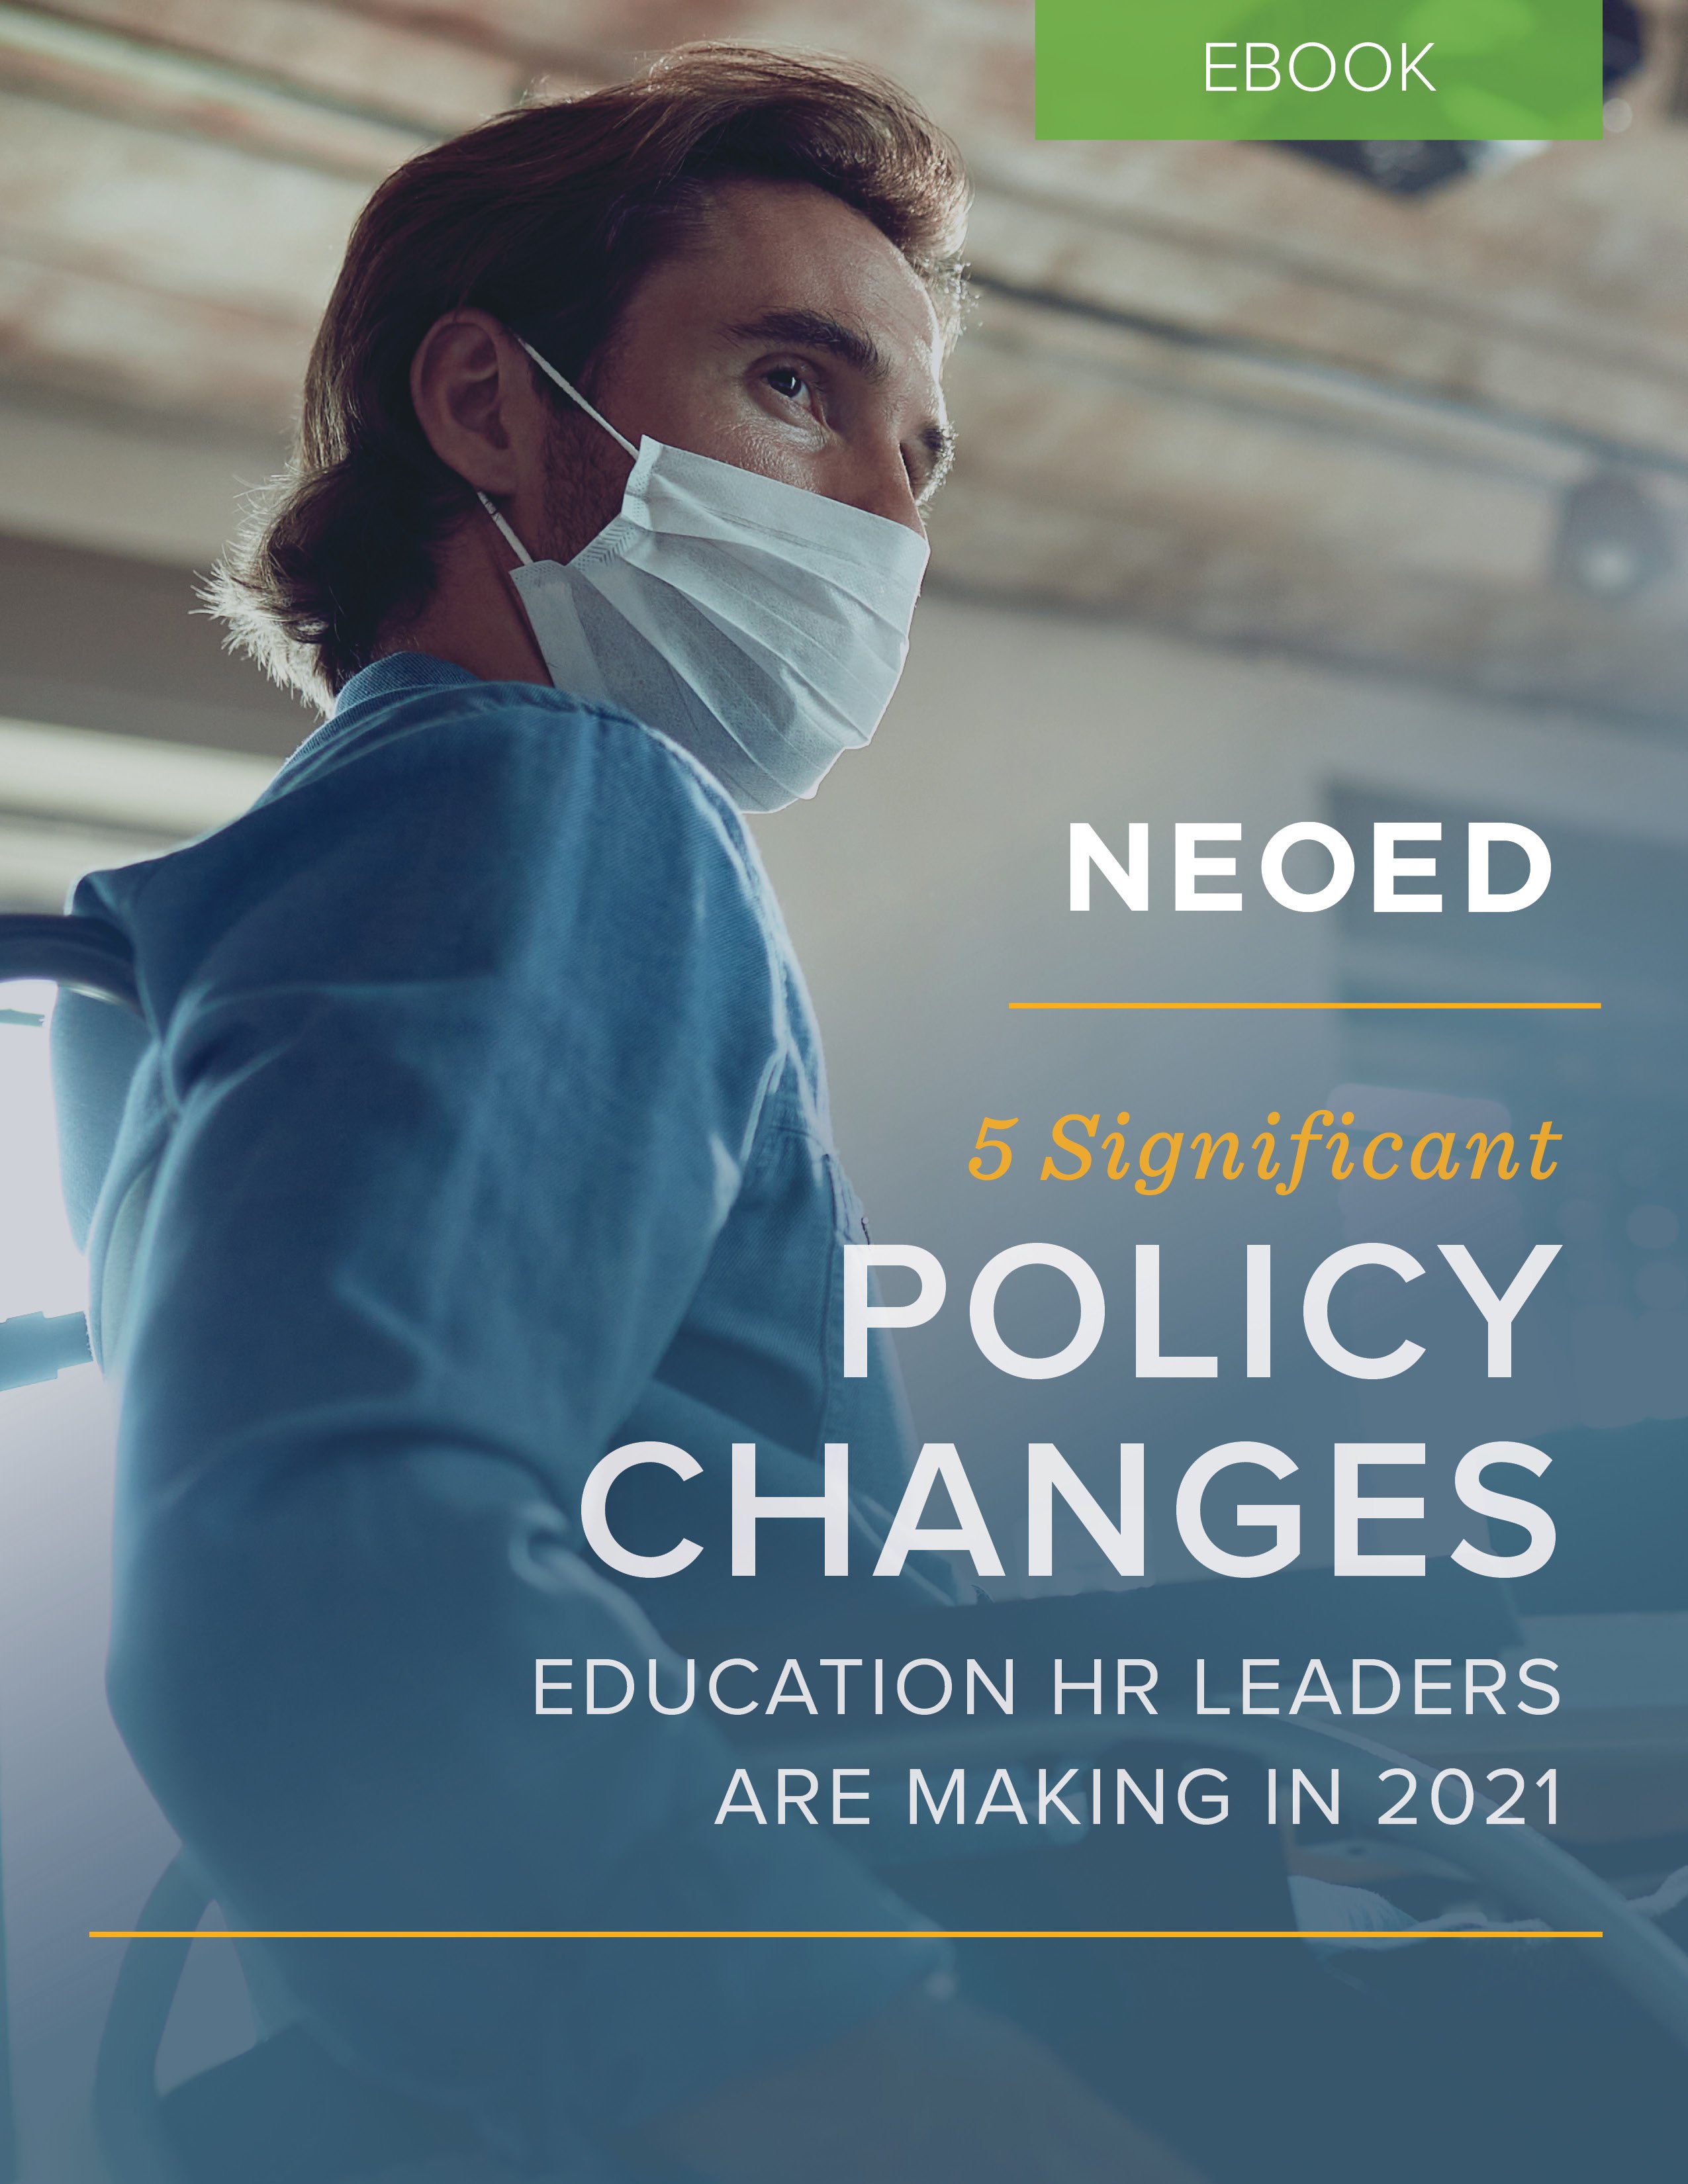 NEOED 5 Policy Changes Education HR Leaders are Making in 2021